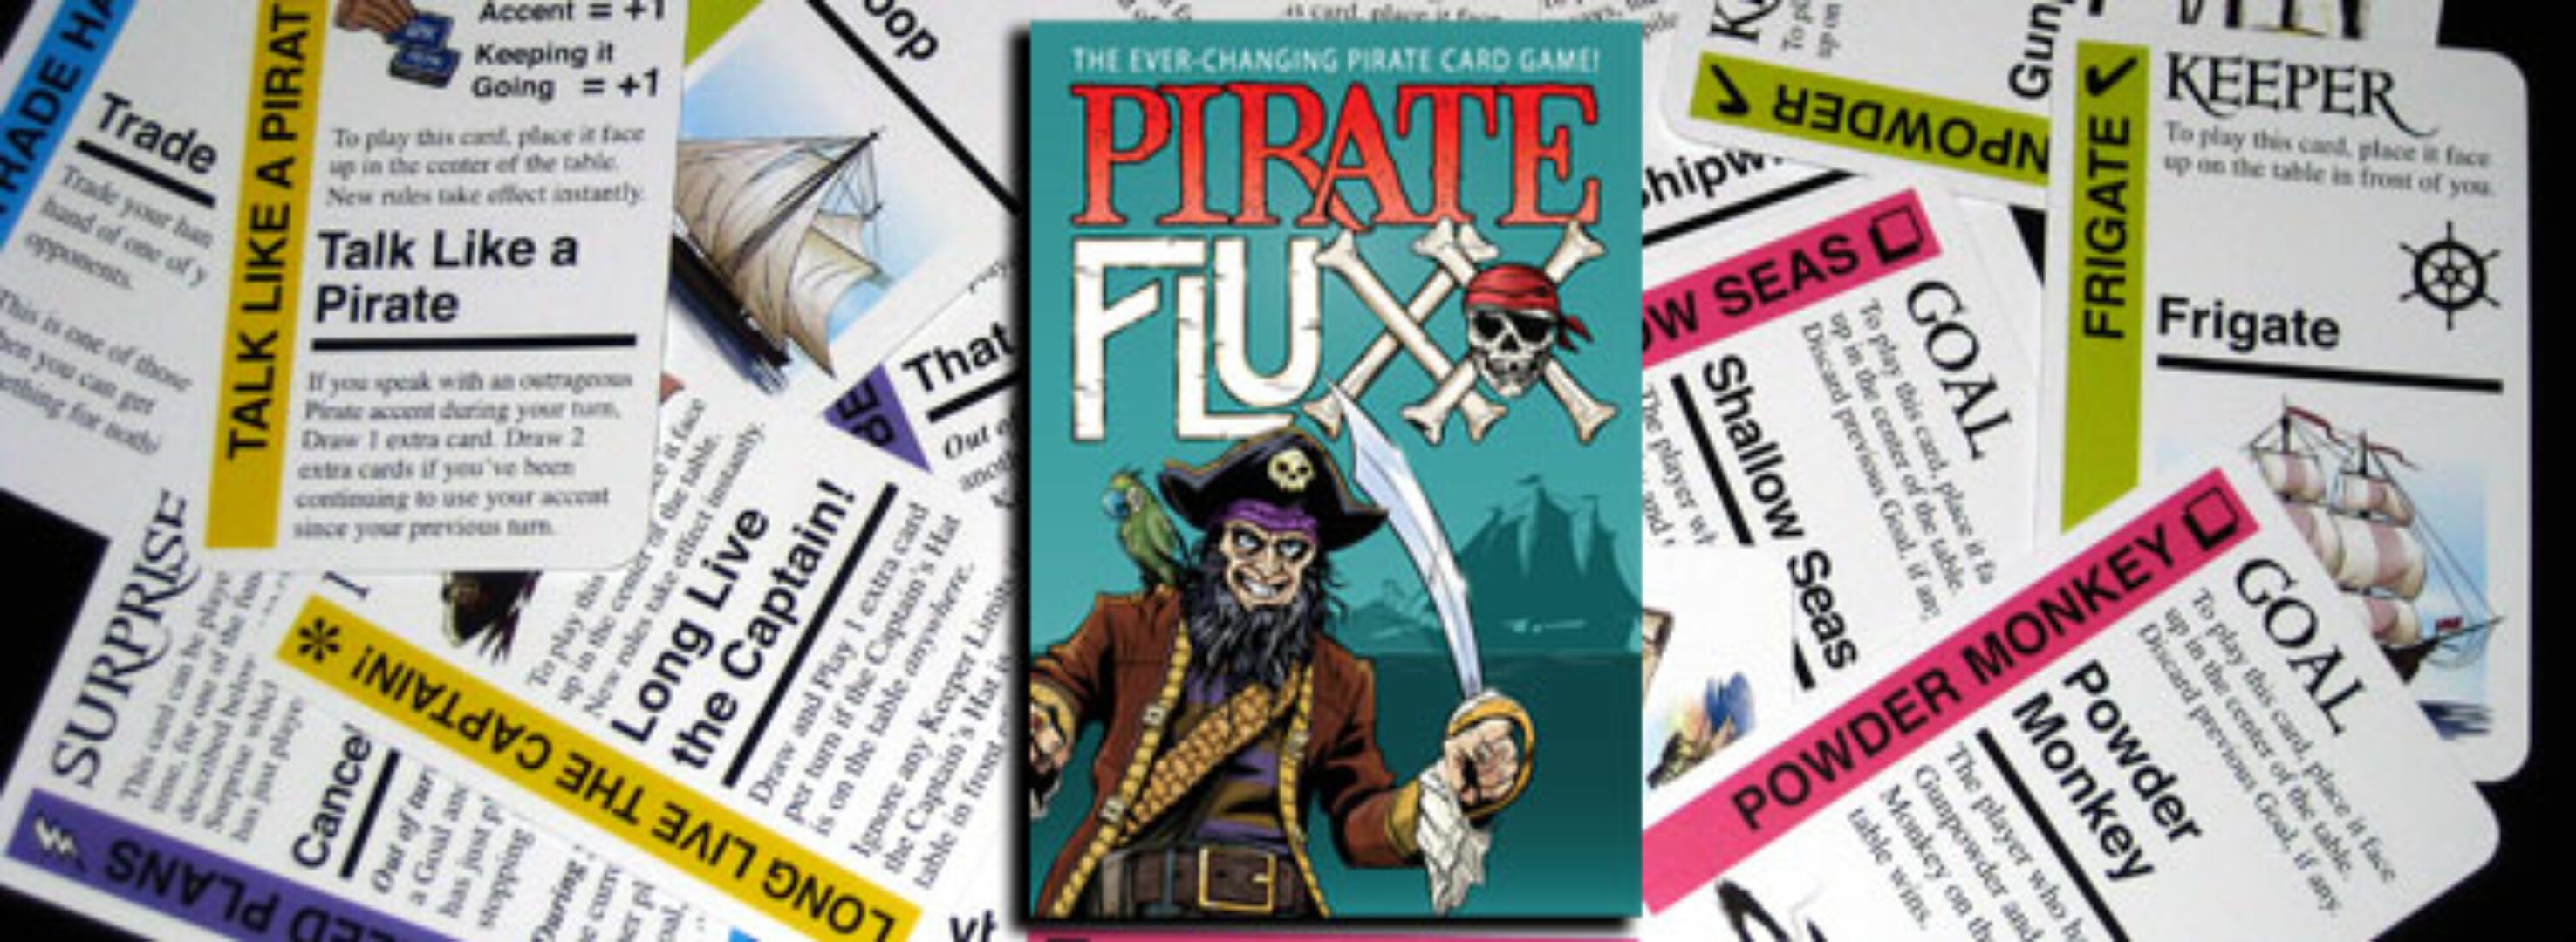 Review: Pirate Fluxx (Card Game)